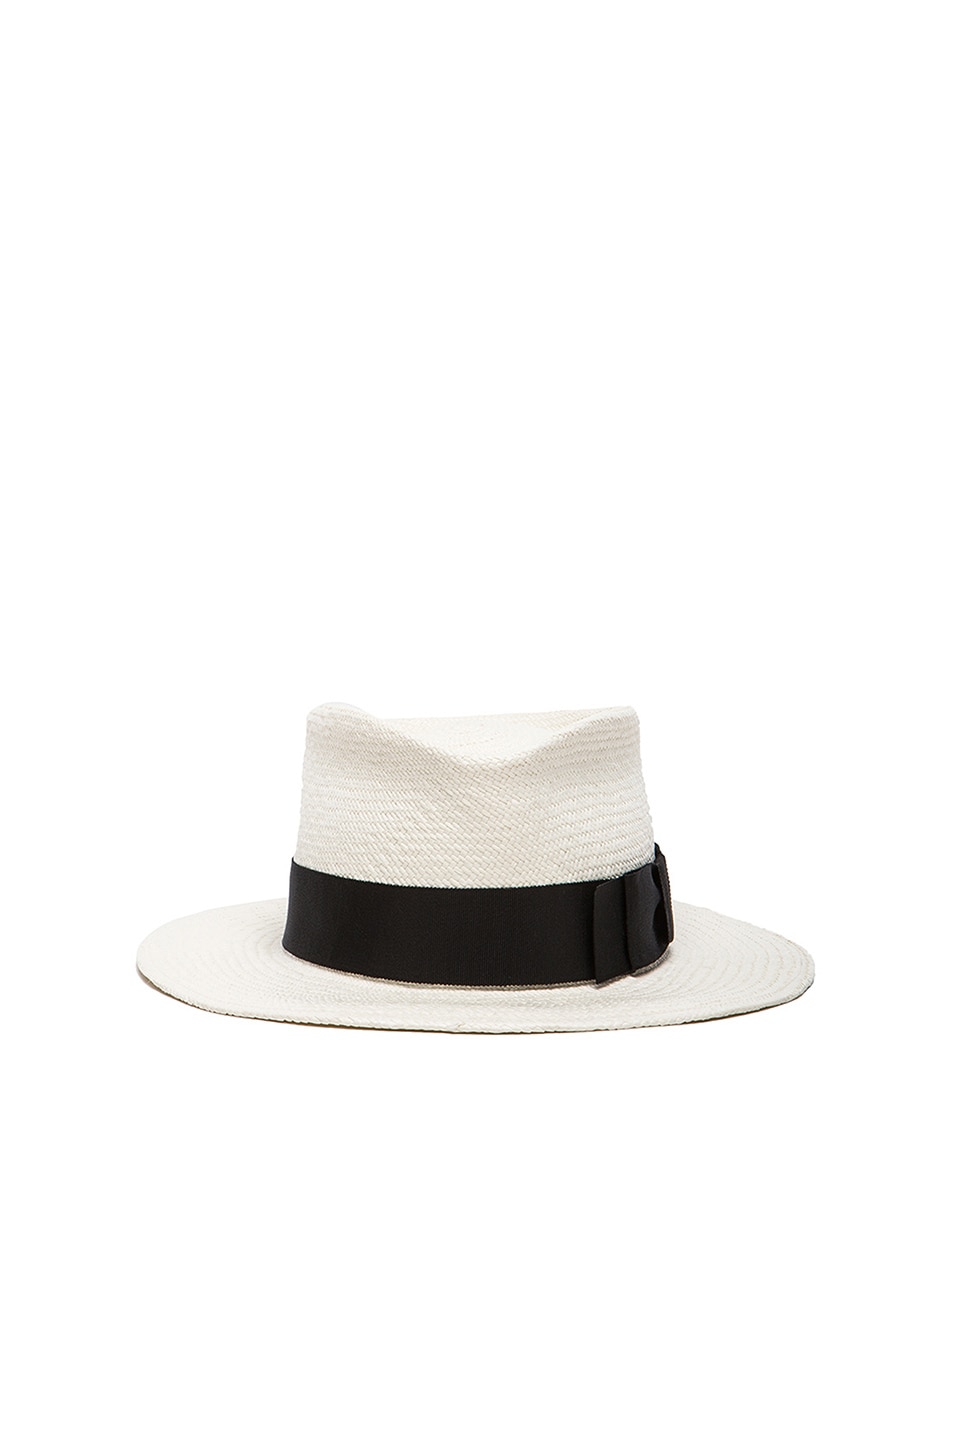 Image 1 of Gladys Tamez Millinery The Valentino Hat in White